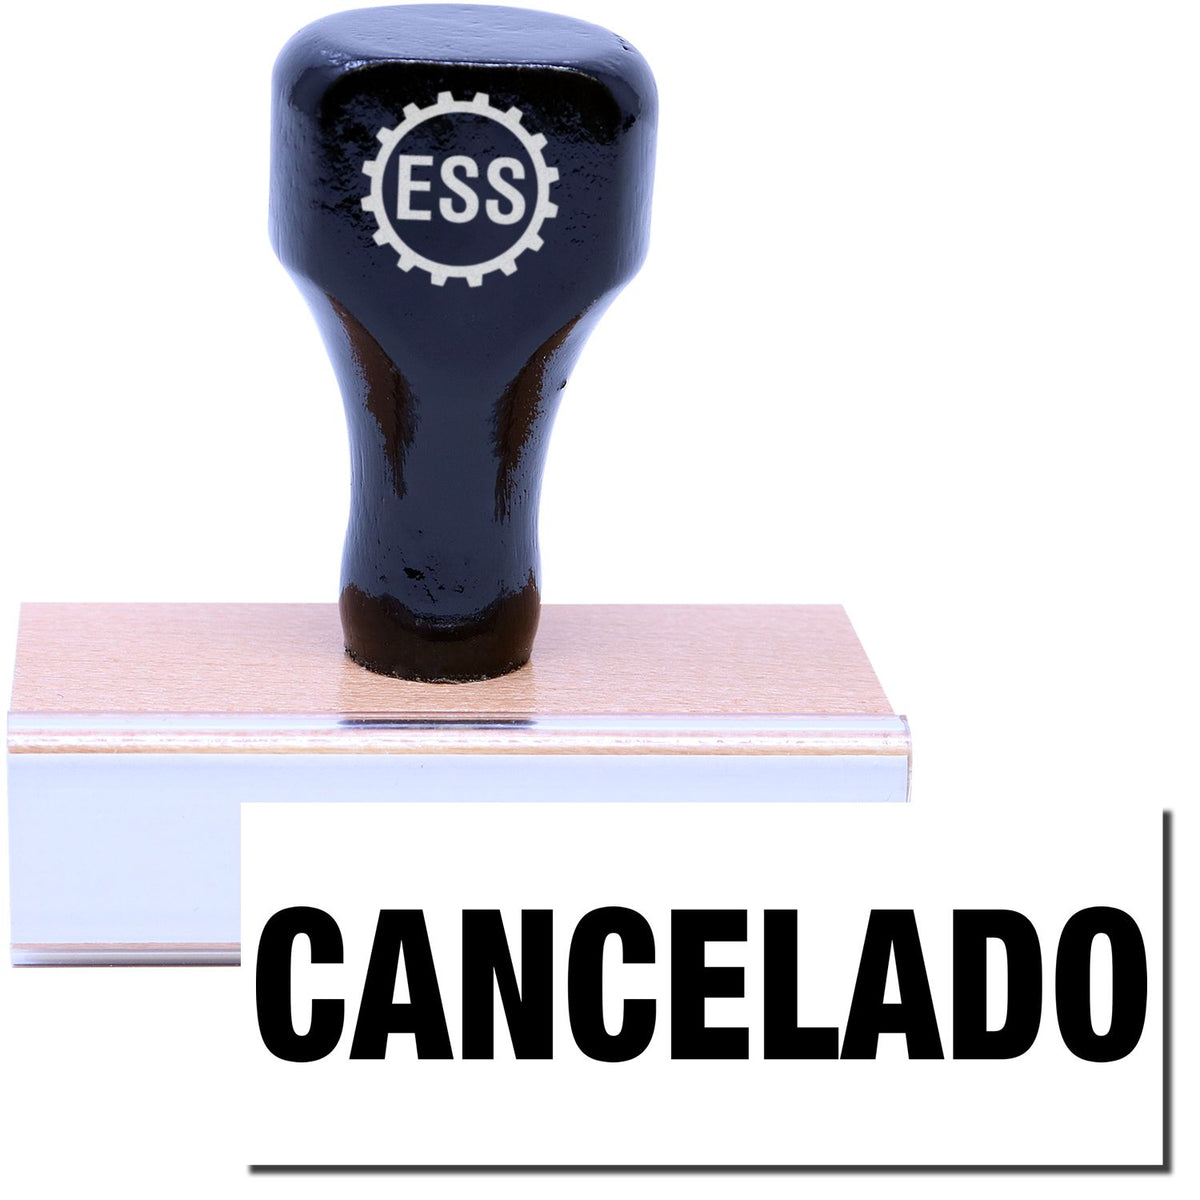 A stock office rubber stamp with a stamped image showing how the text &quot;CANCELADO&quot; in a large font is displayed after stamping.